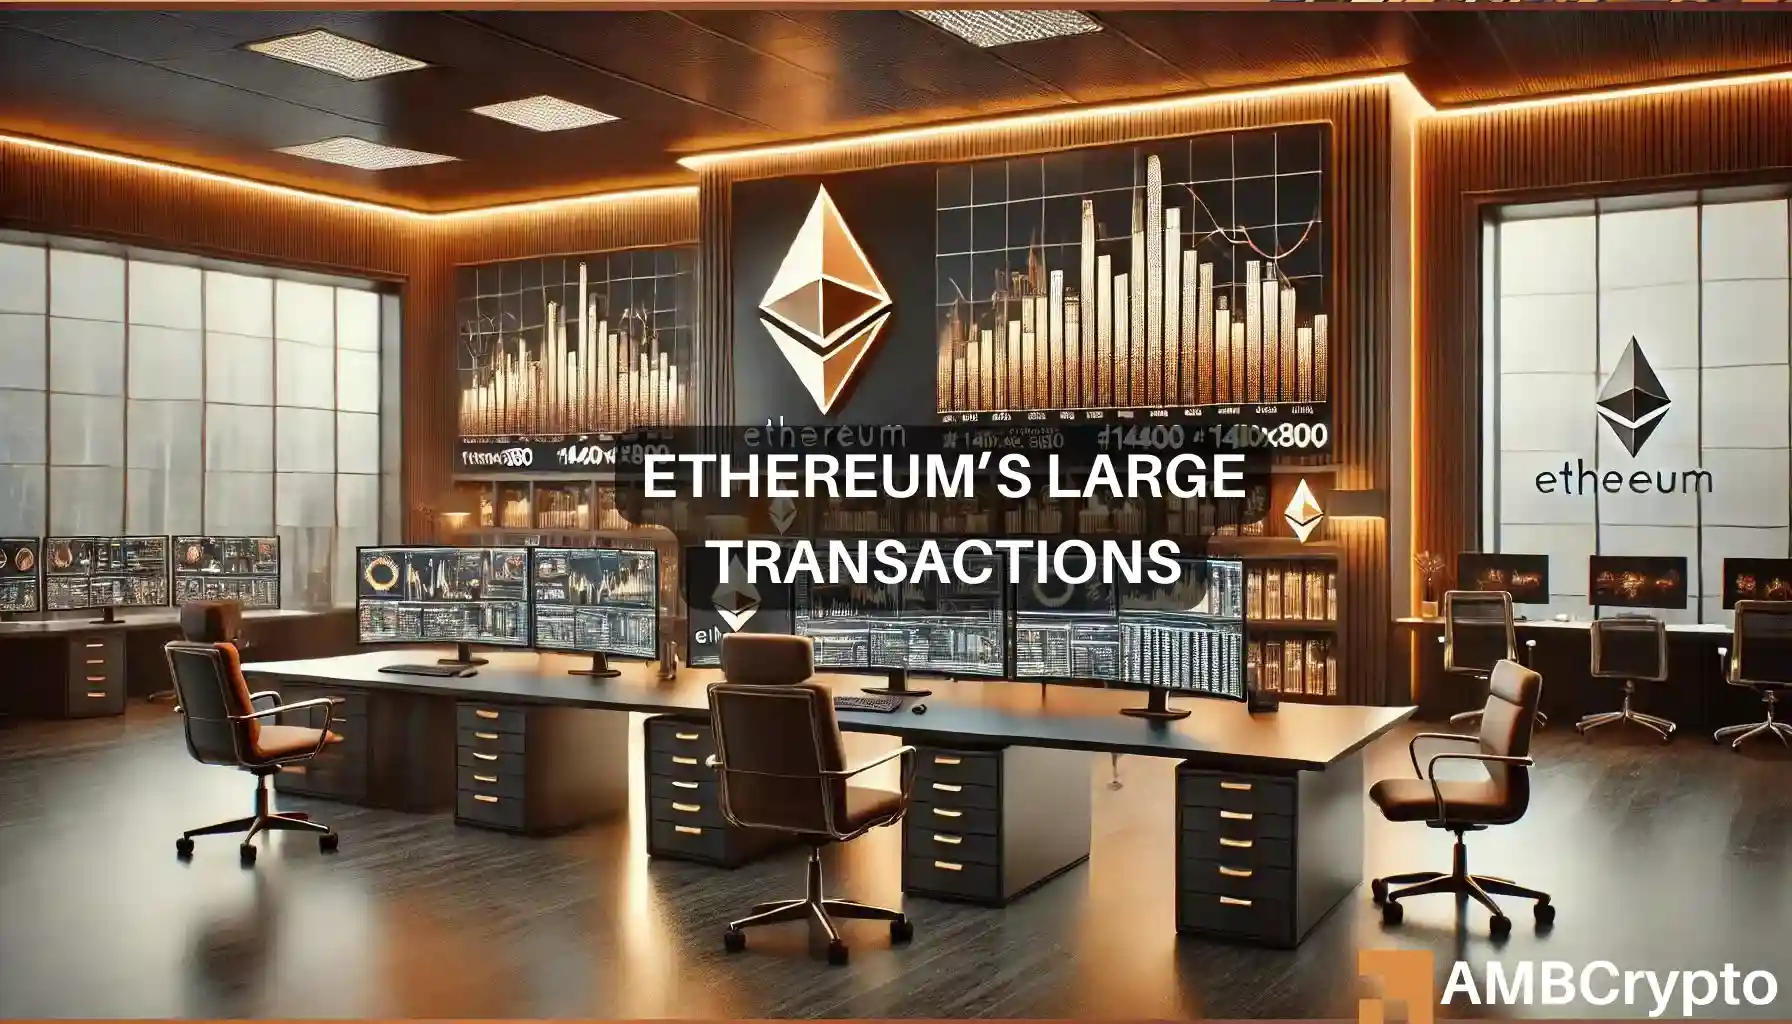 Ethereum transactions surge: Buying frenzy or selling spree?